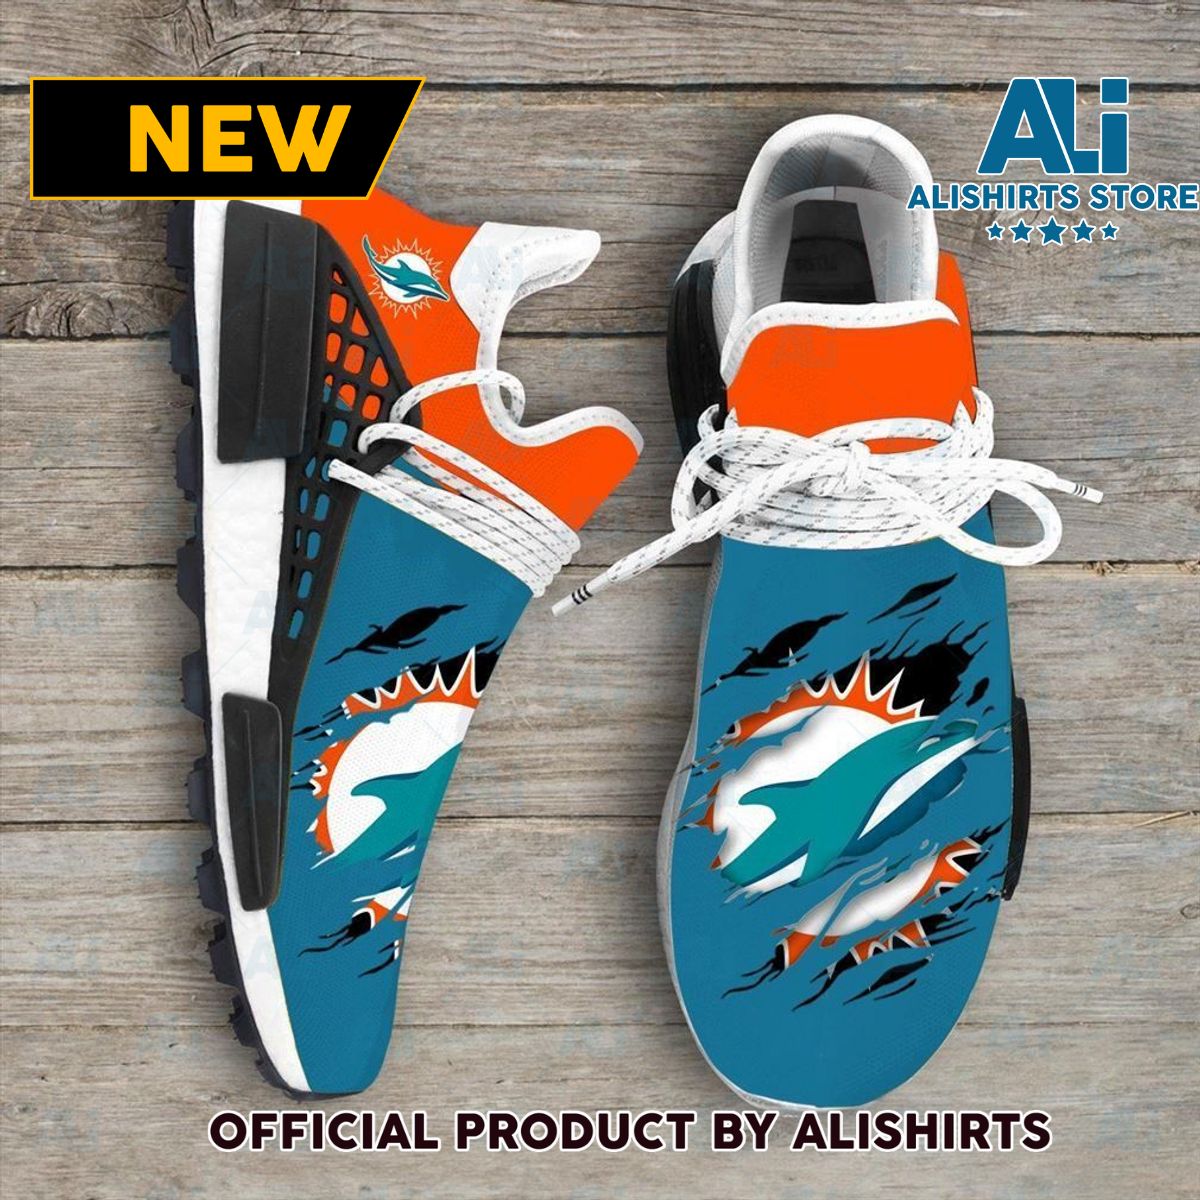 Miami Dolphins NFL Sport Teams NMD Human Race Adidas NMD Sneakers